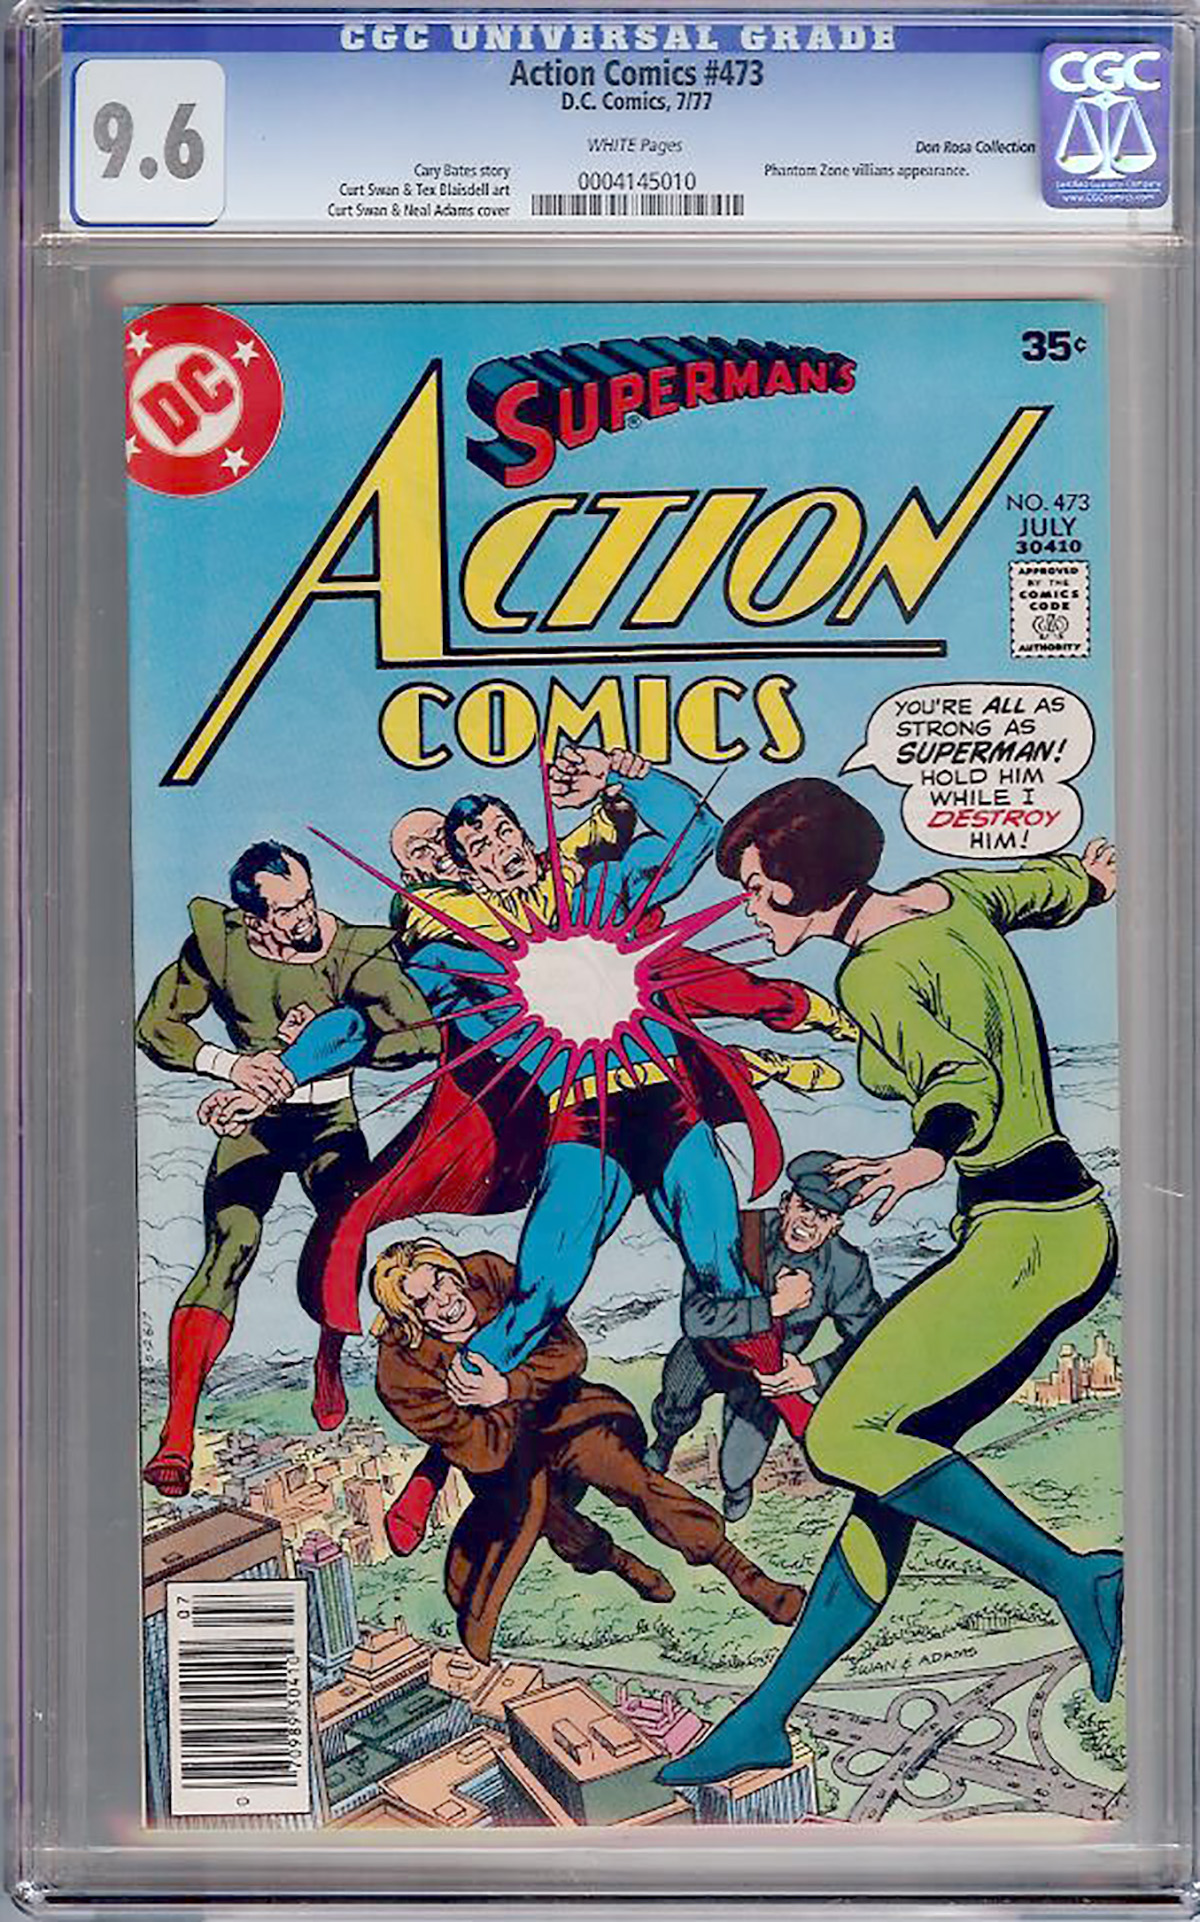 Action Comics #473 CGC 9.6 w Don Rosa Collection